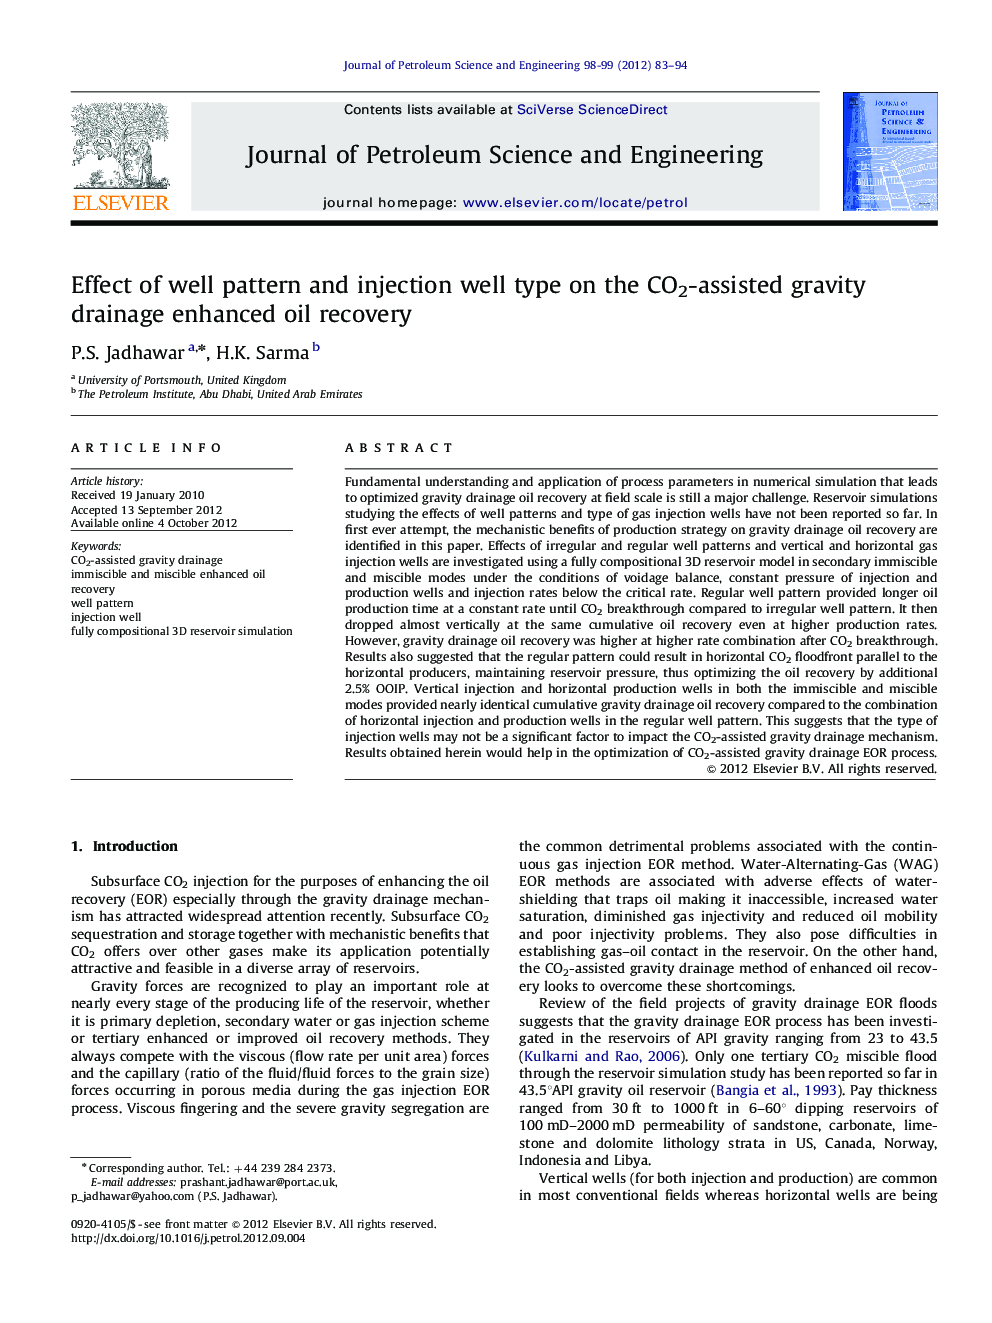 Effect of well pattern and injection well type on the CO2-assisted gravity drainage enhanced oil recovery